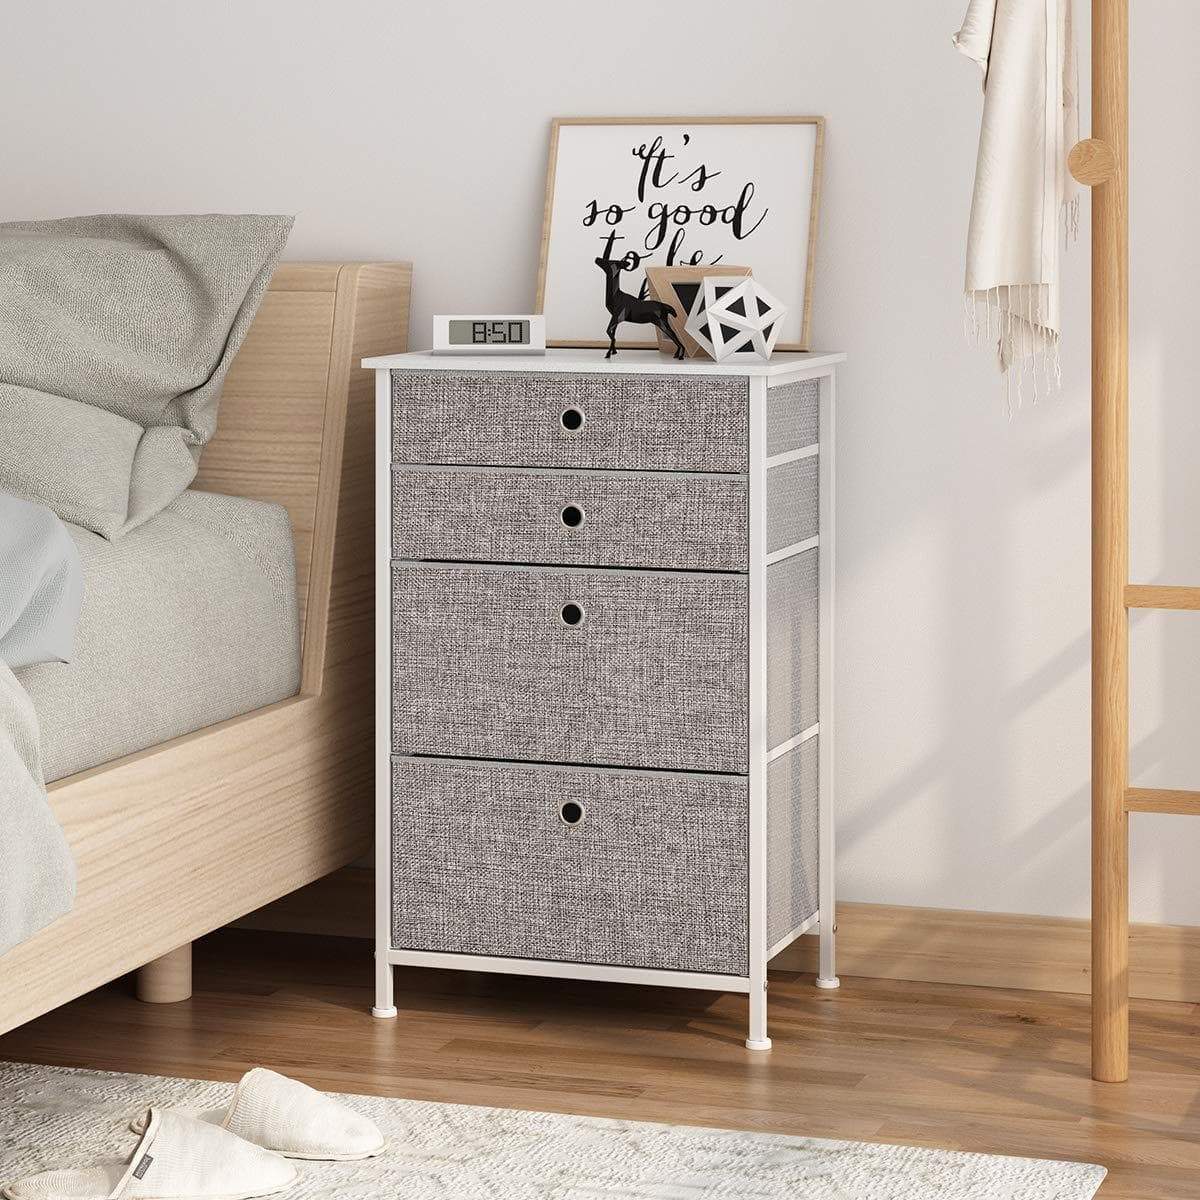 Heavy duty langria faux linen home dresser storage tower with 4 easy pull drawers sturdy metal frame and wooden tabletop perfect organizer for guest room dorm room closet hallway office area gray